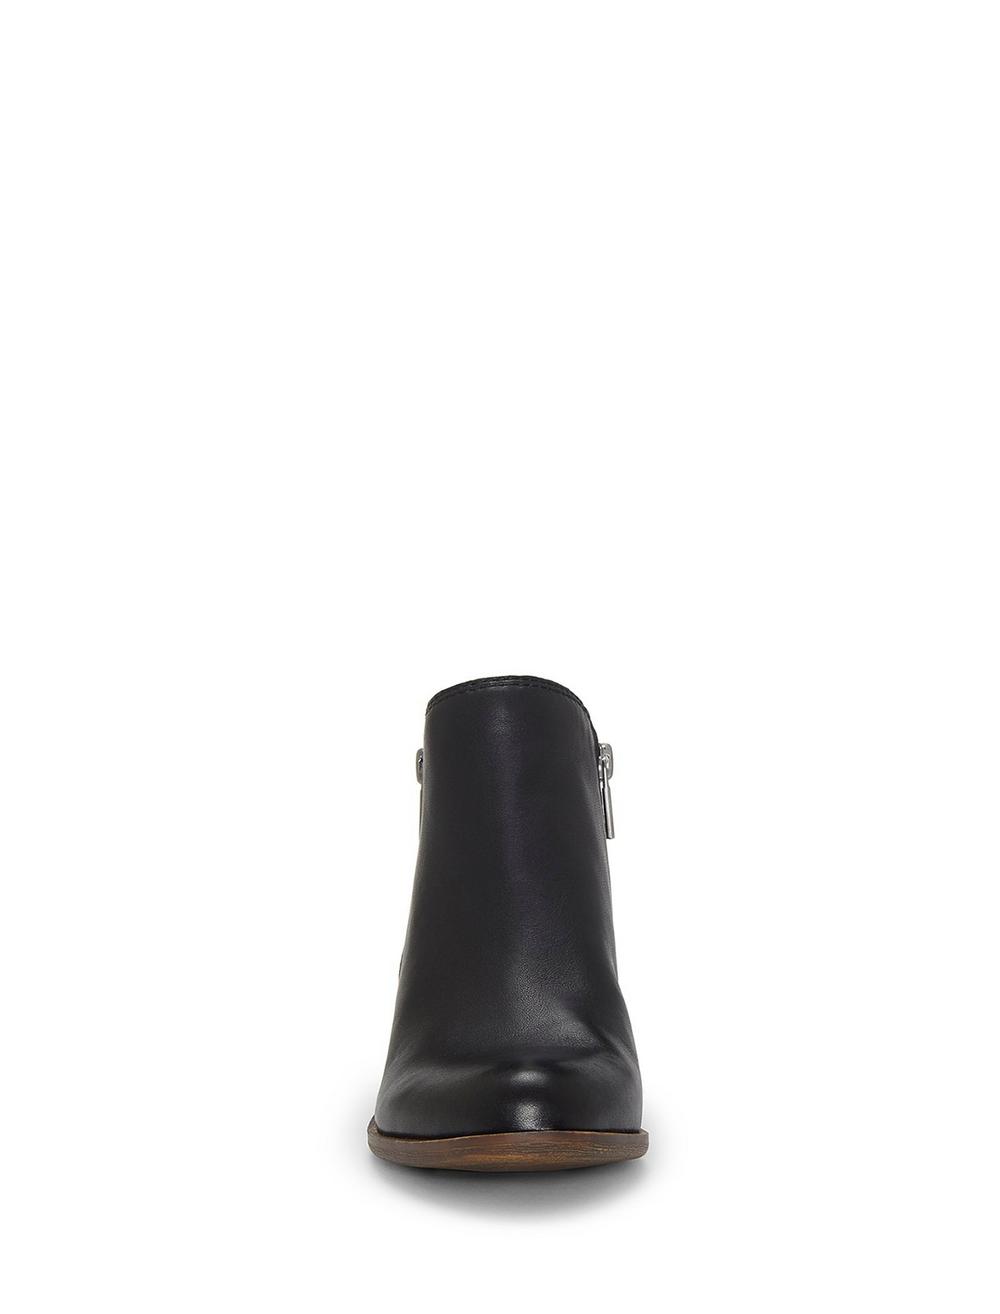 Lucky Brand Women's Basel Bootie Black Leather Wide width Ankle Boot